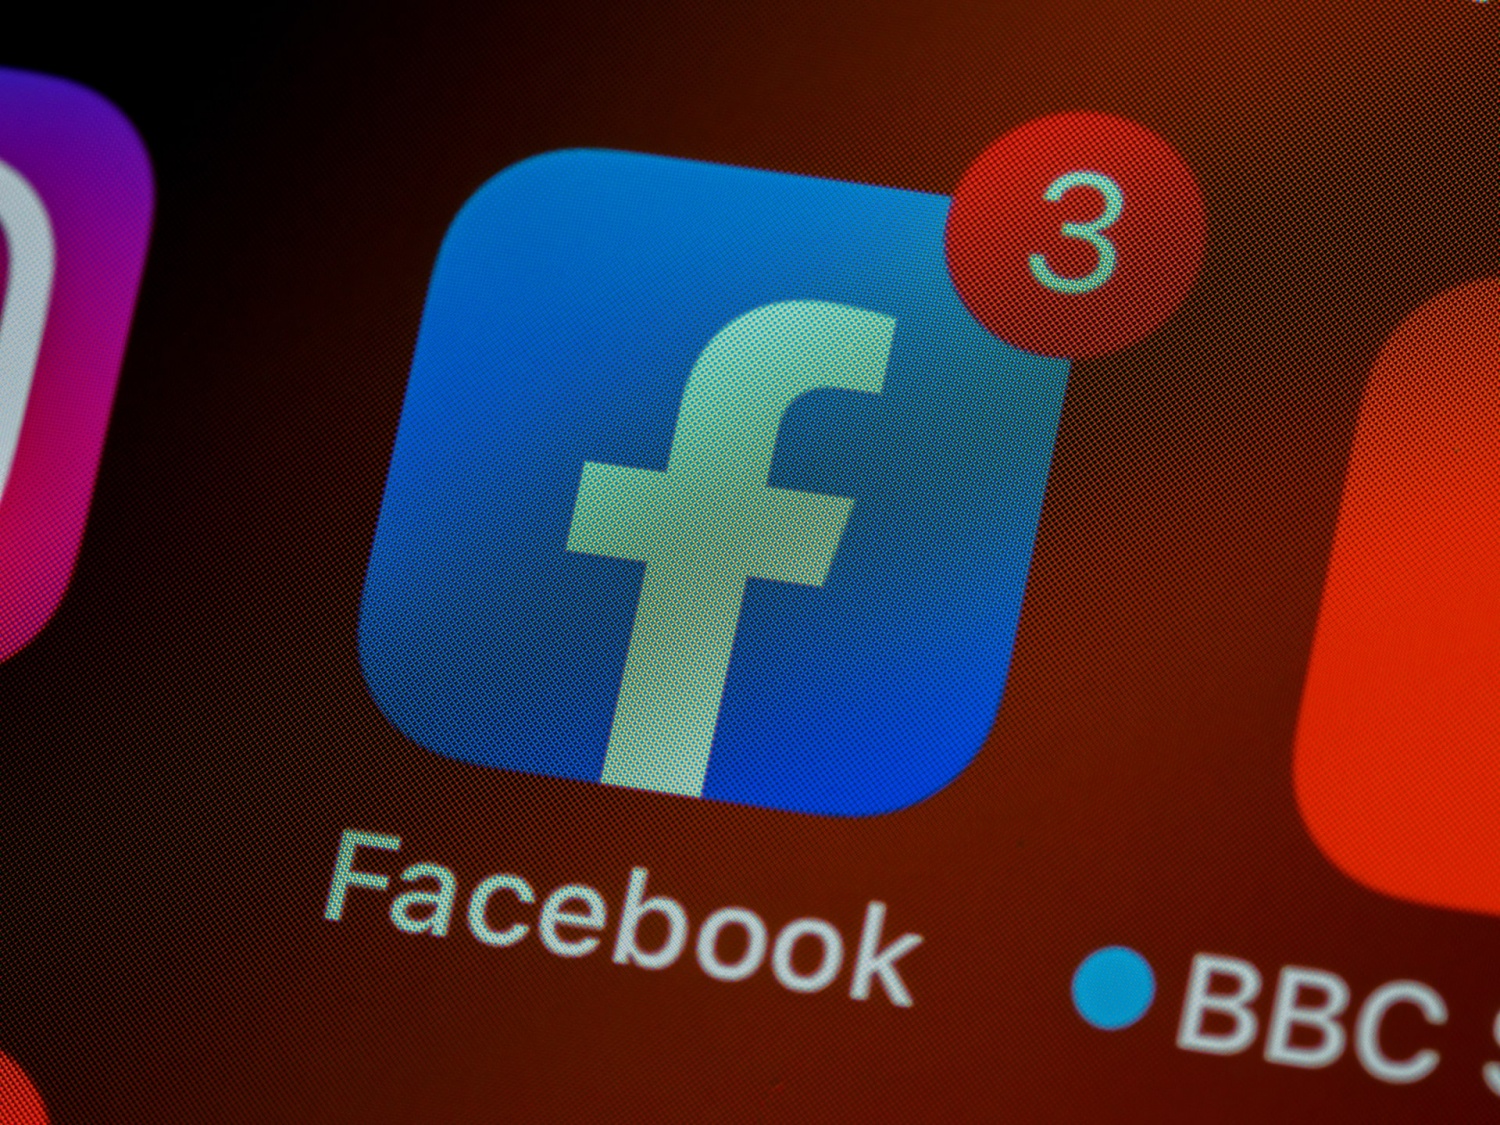 Don't Click on Suspicious Facebook Links! New Android FlyTrap Malware Steals Your Data, Spreads Malware